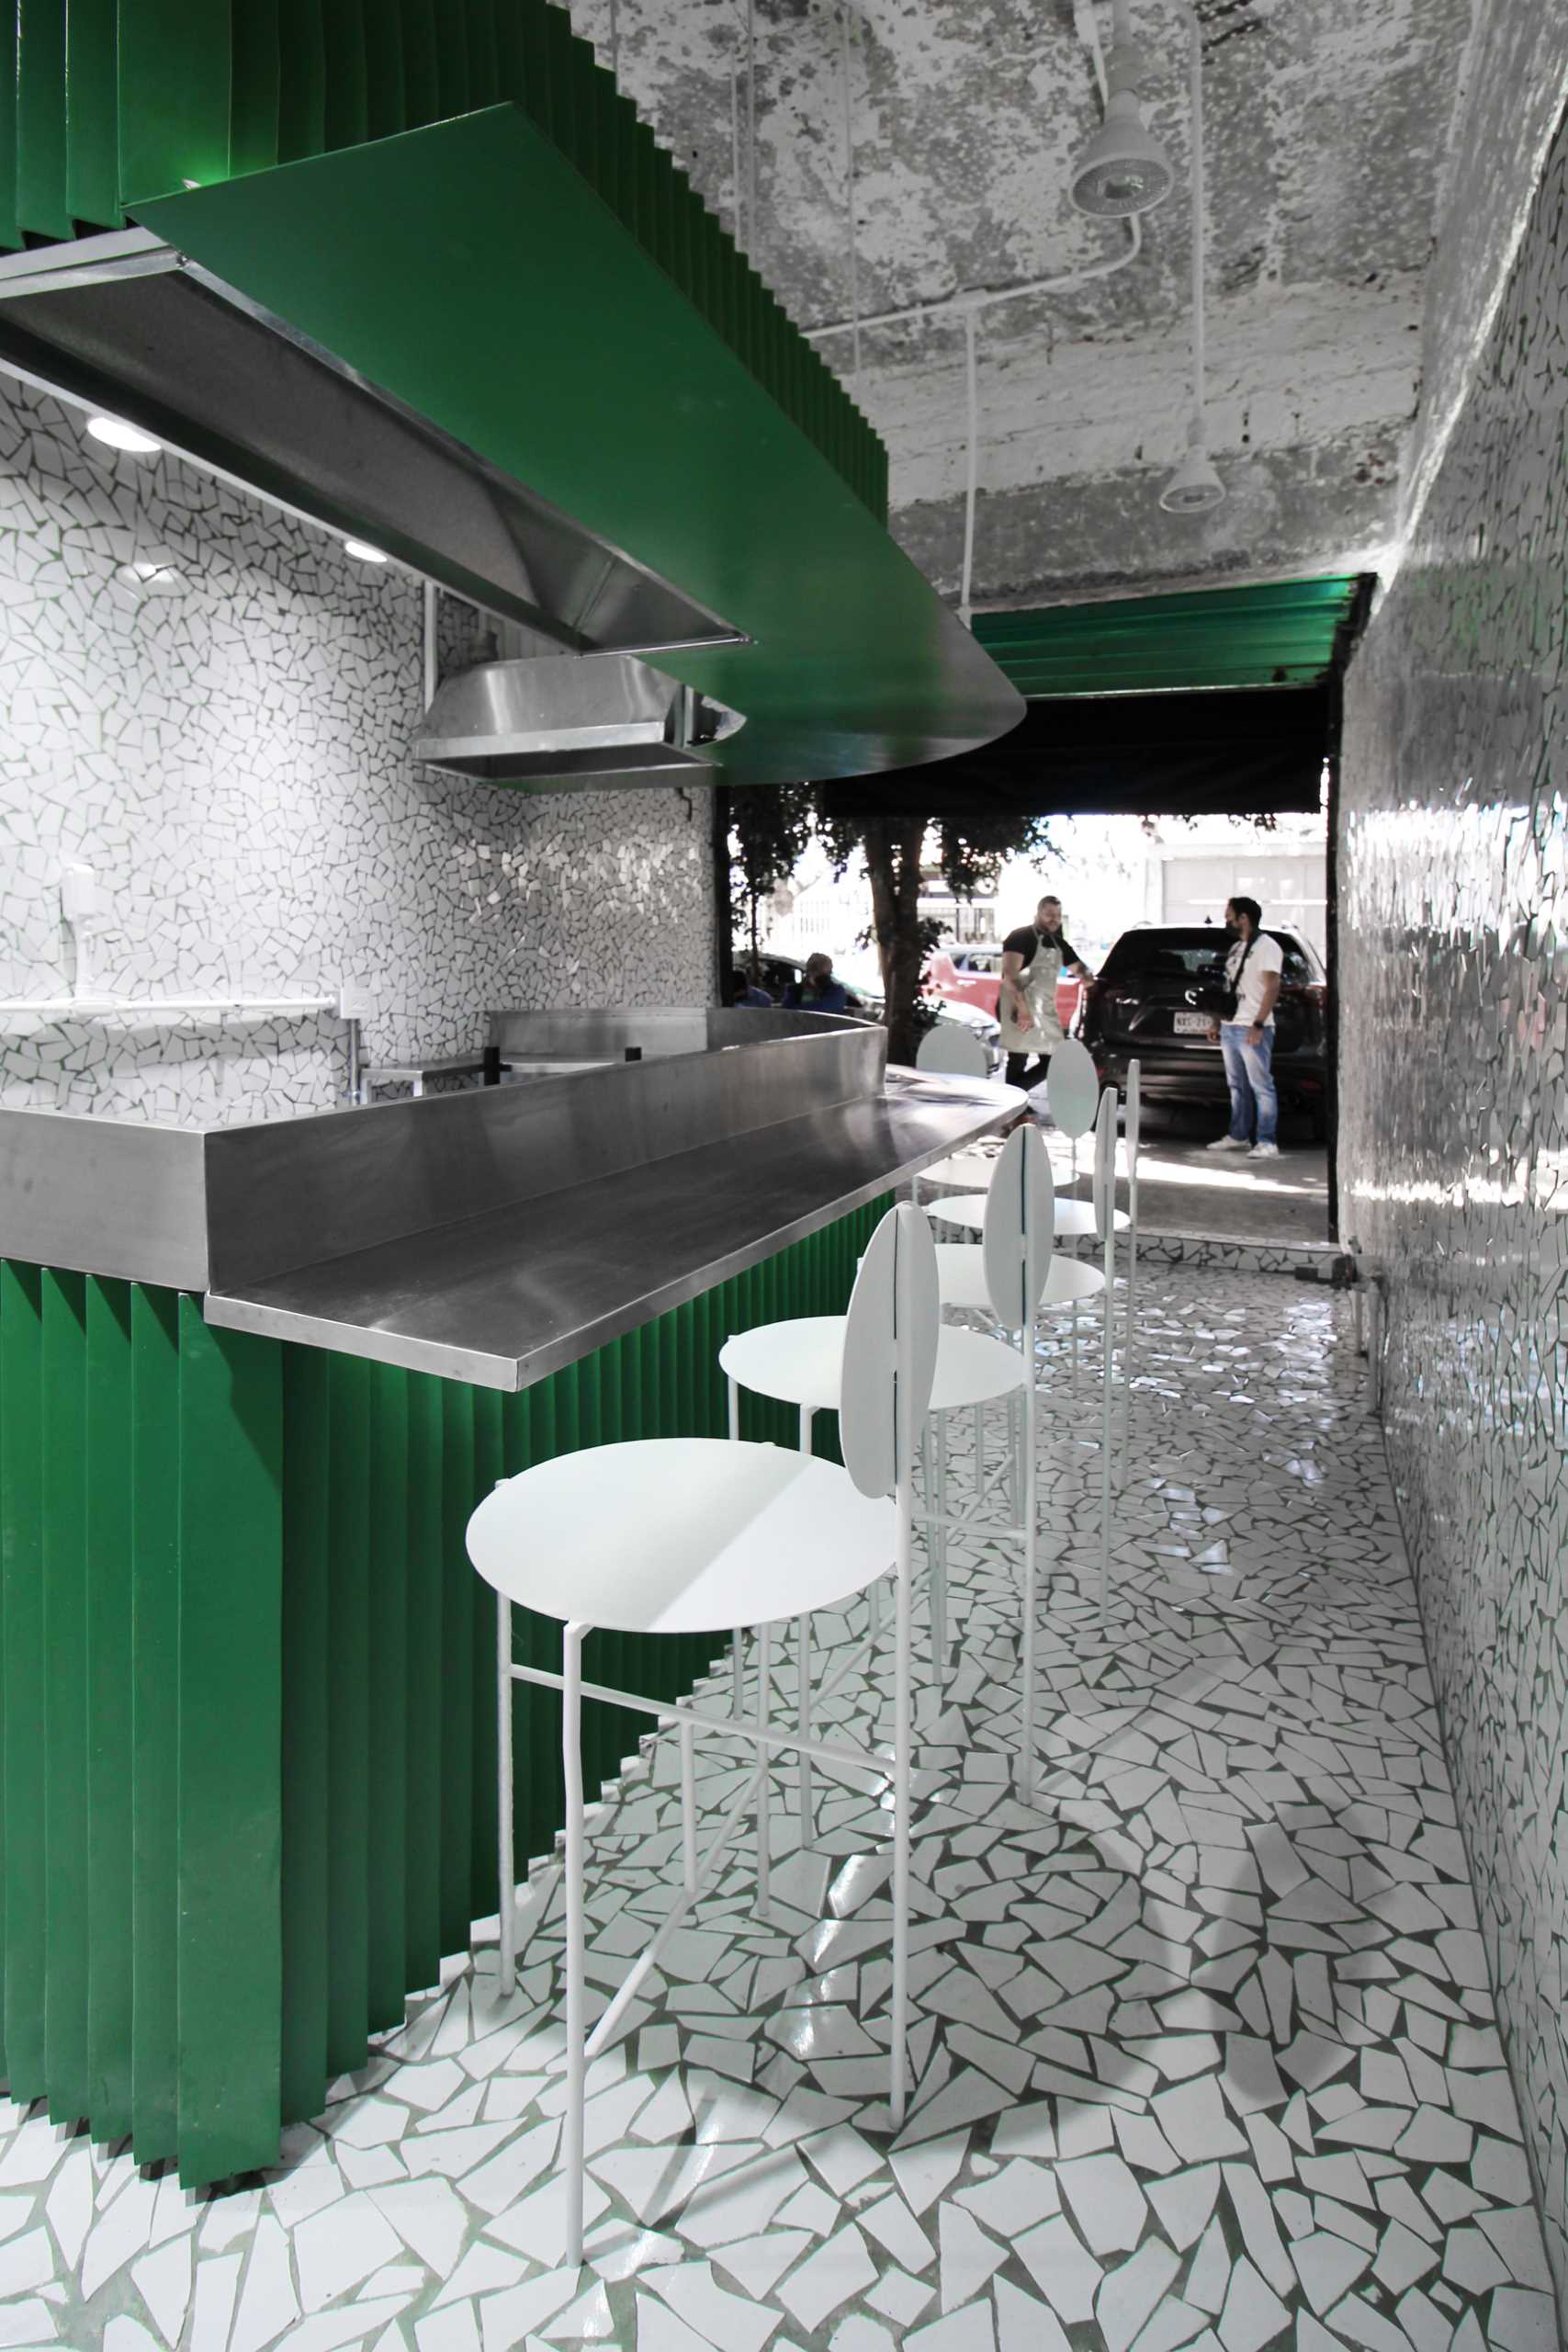 A small taco shop (taqueria) that features broken tile mosaic walls and floor, and a painted green metal accent with white stools.